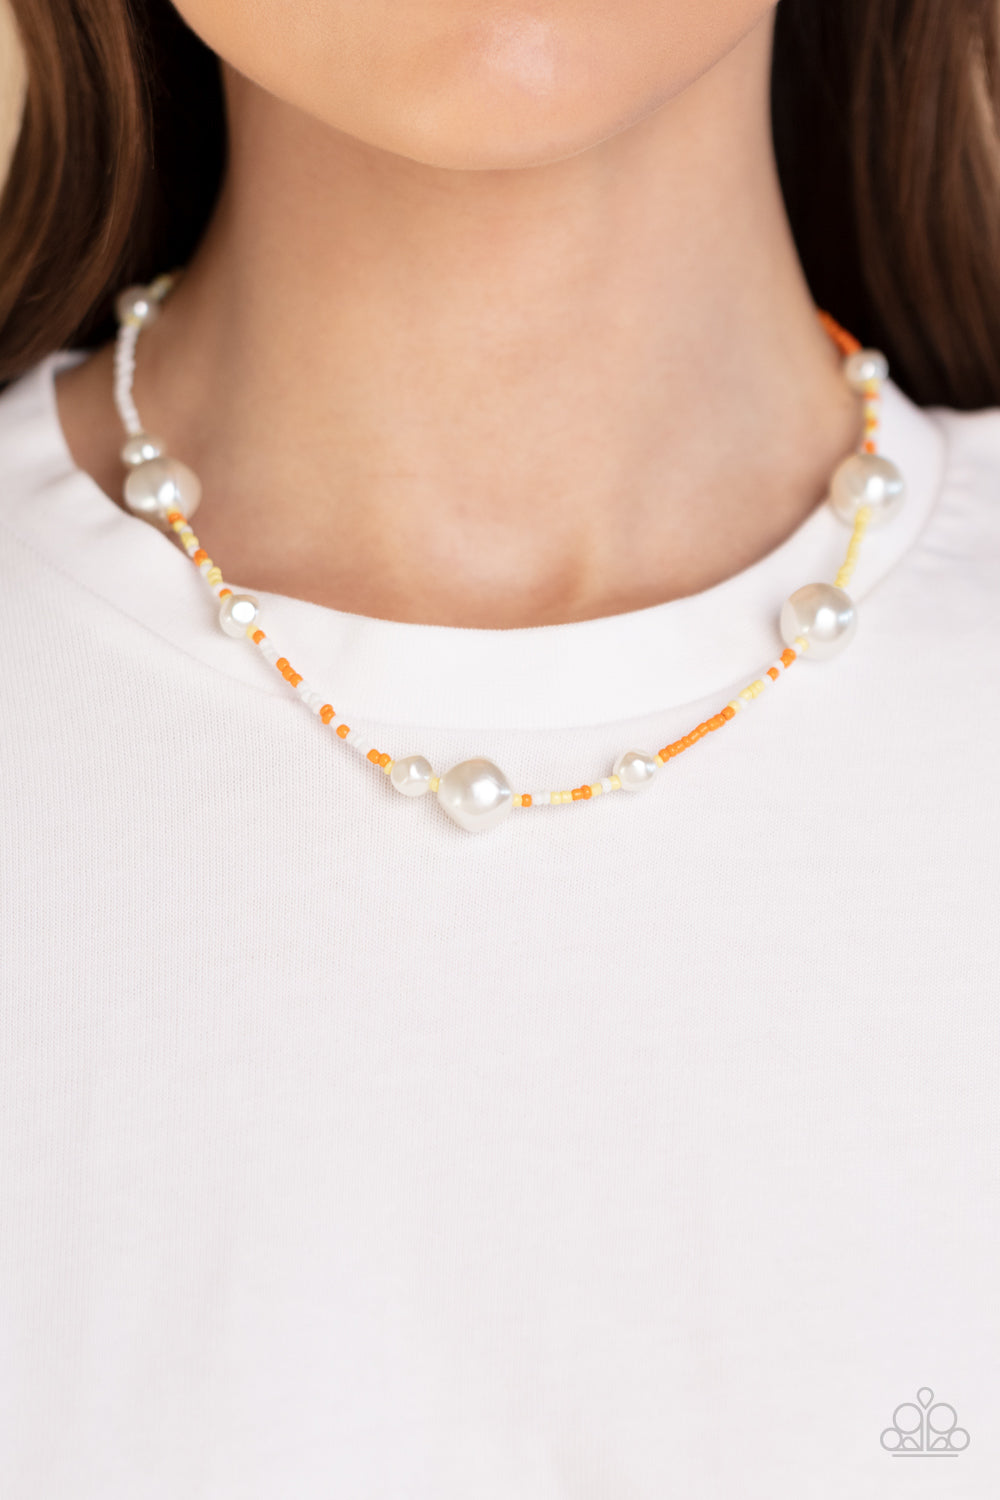 Modern Marina Orange Seed Beads Dainty Necklace Paparazzi Accessories. Subscribe & Save. 